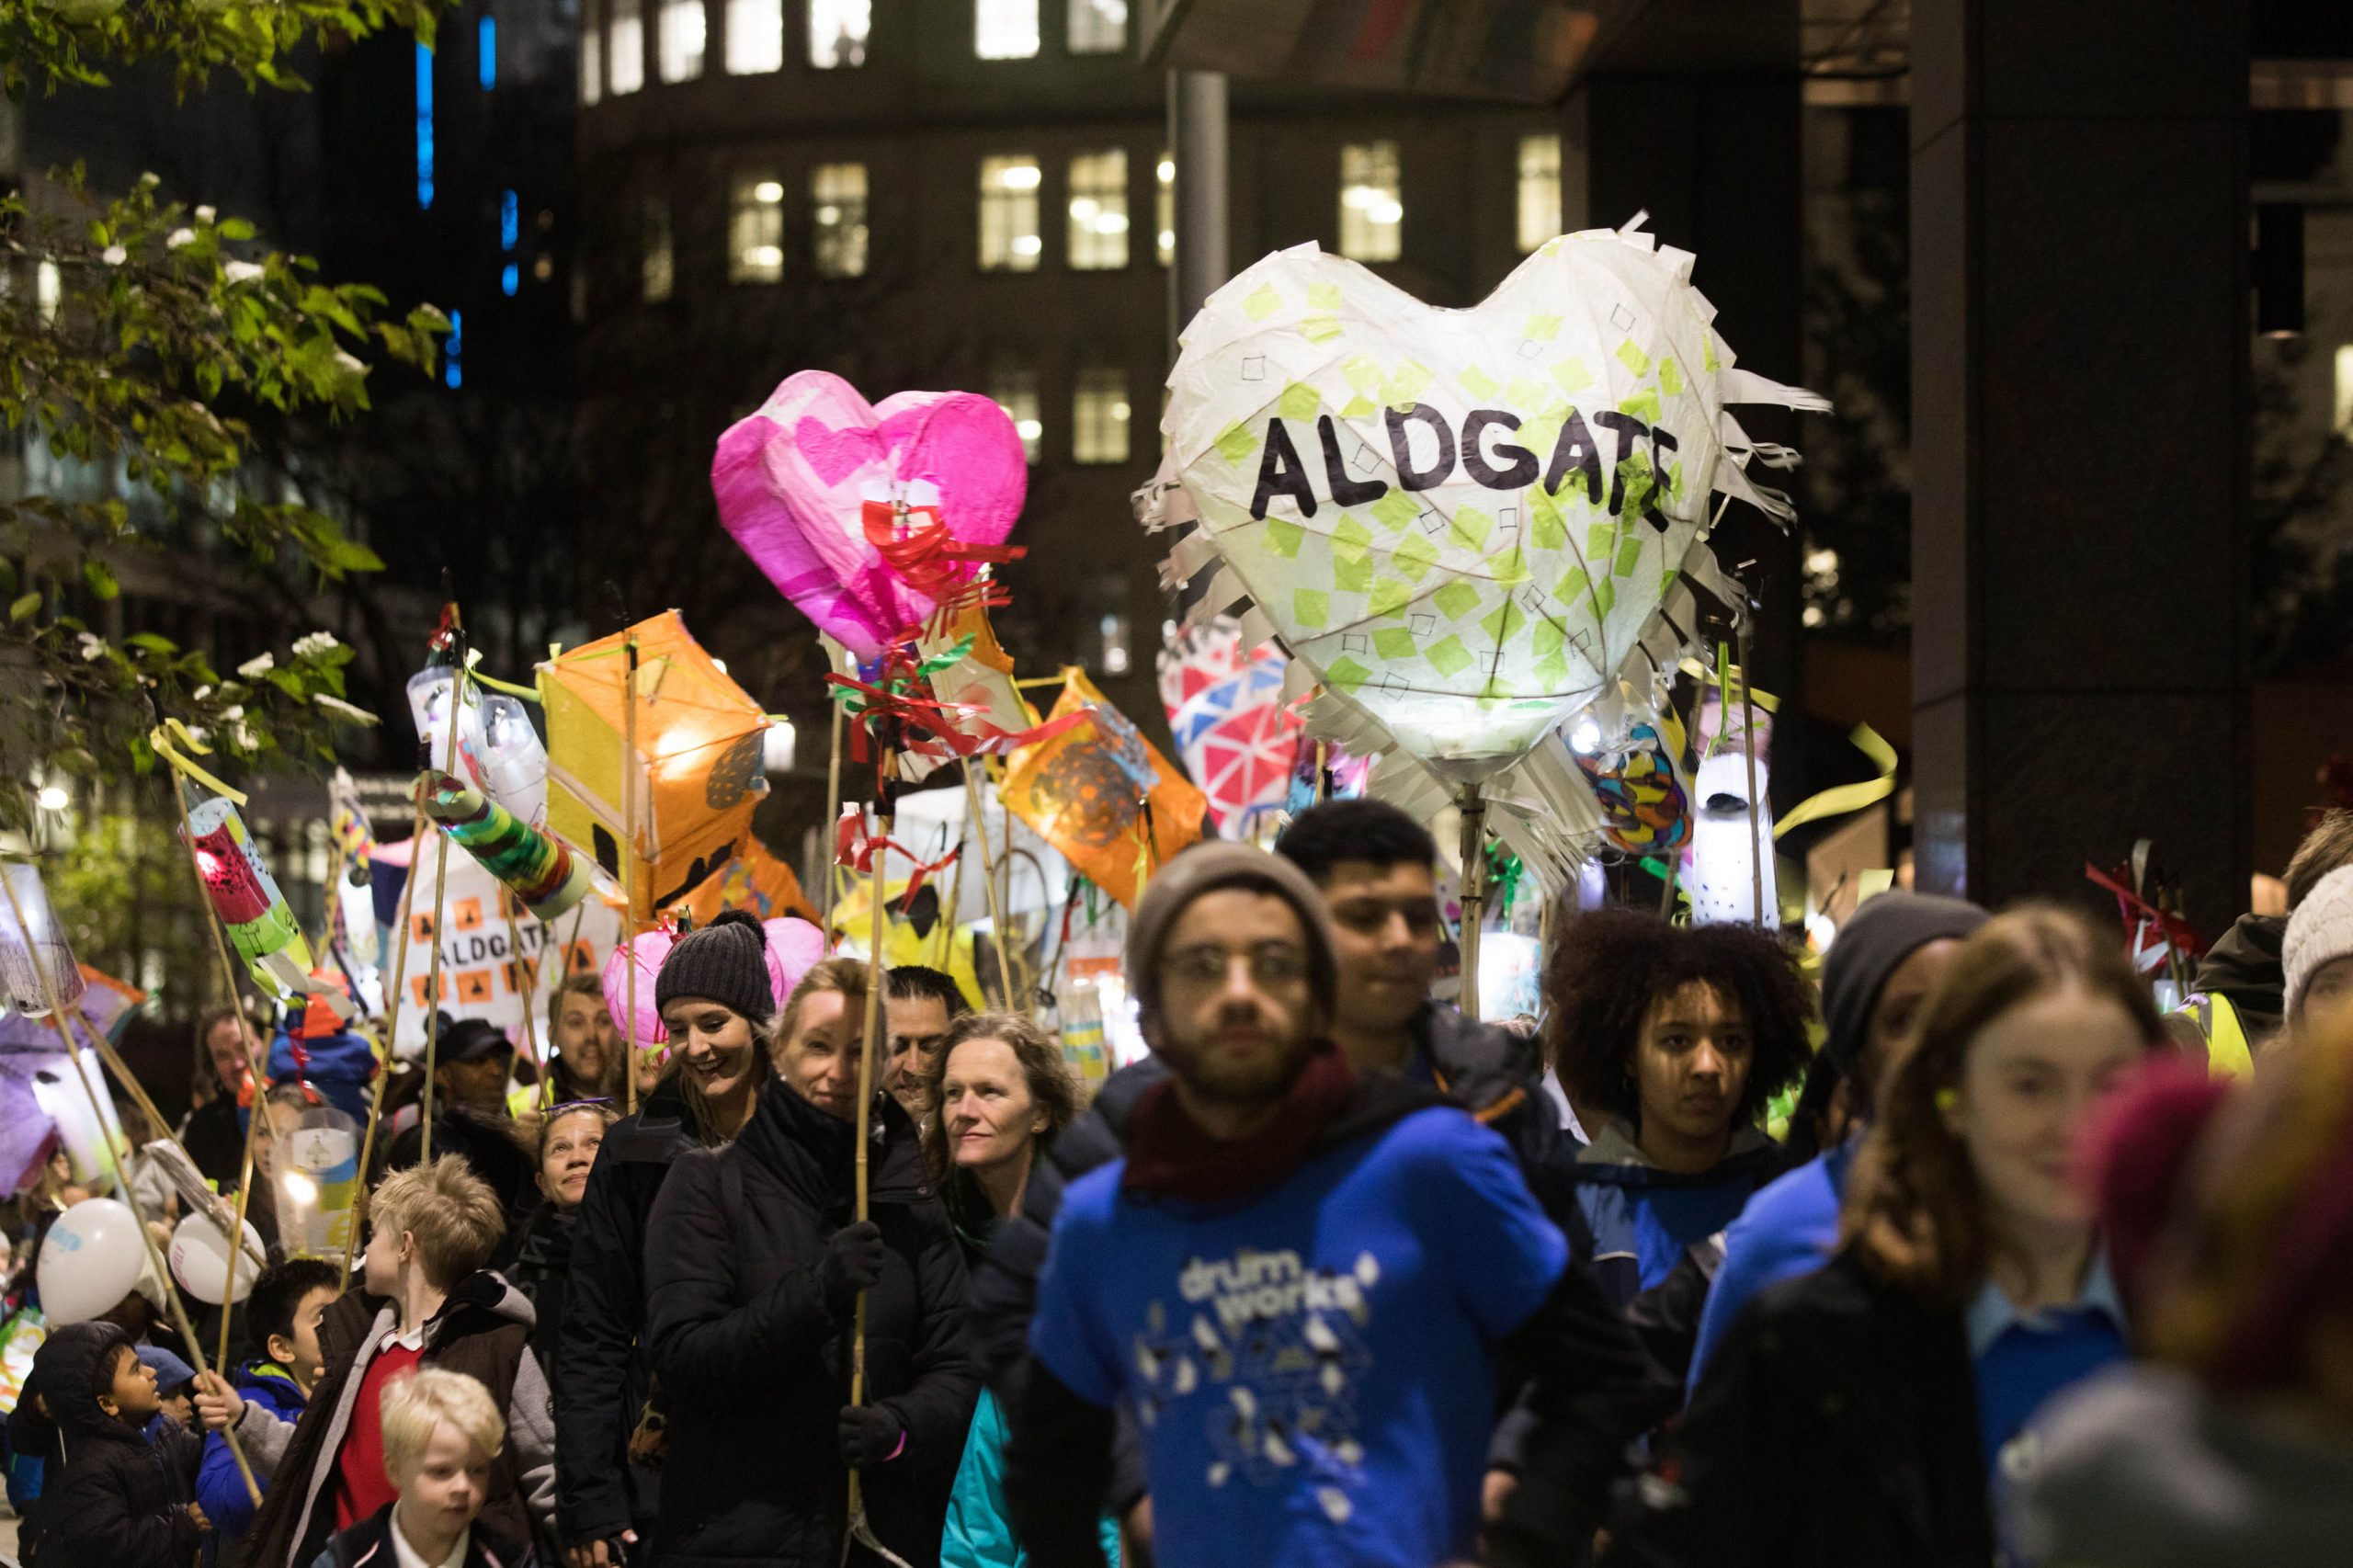 Aldgate in Winter Festival is returning for its fifth year!